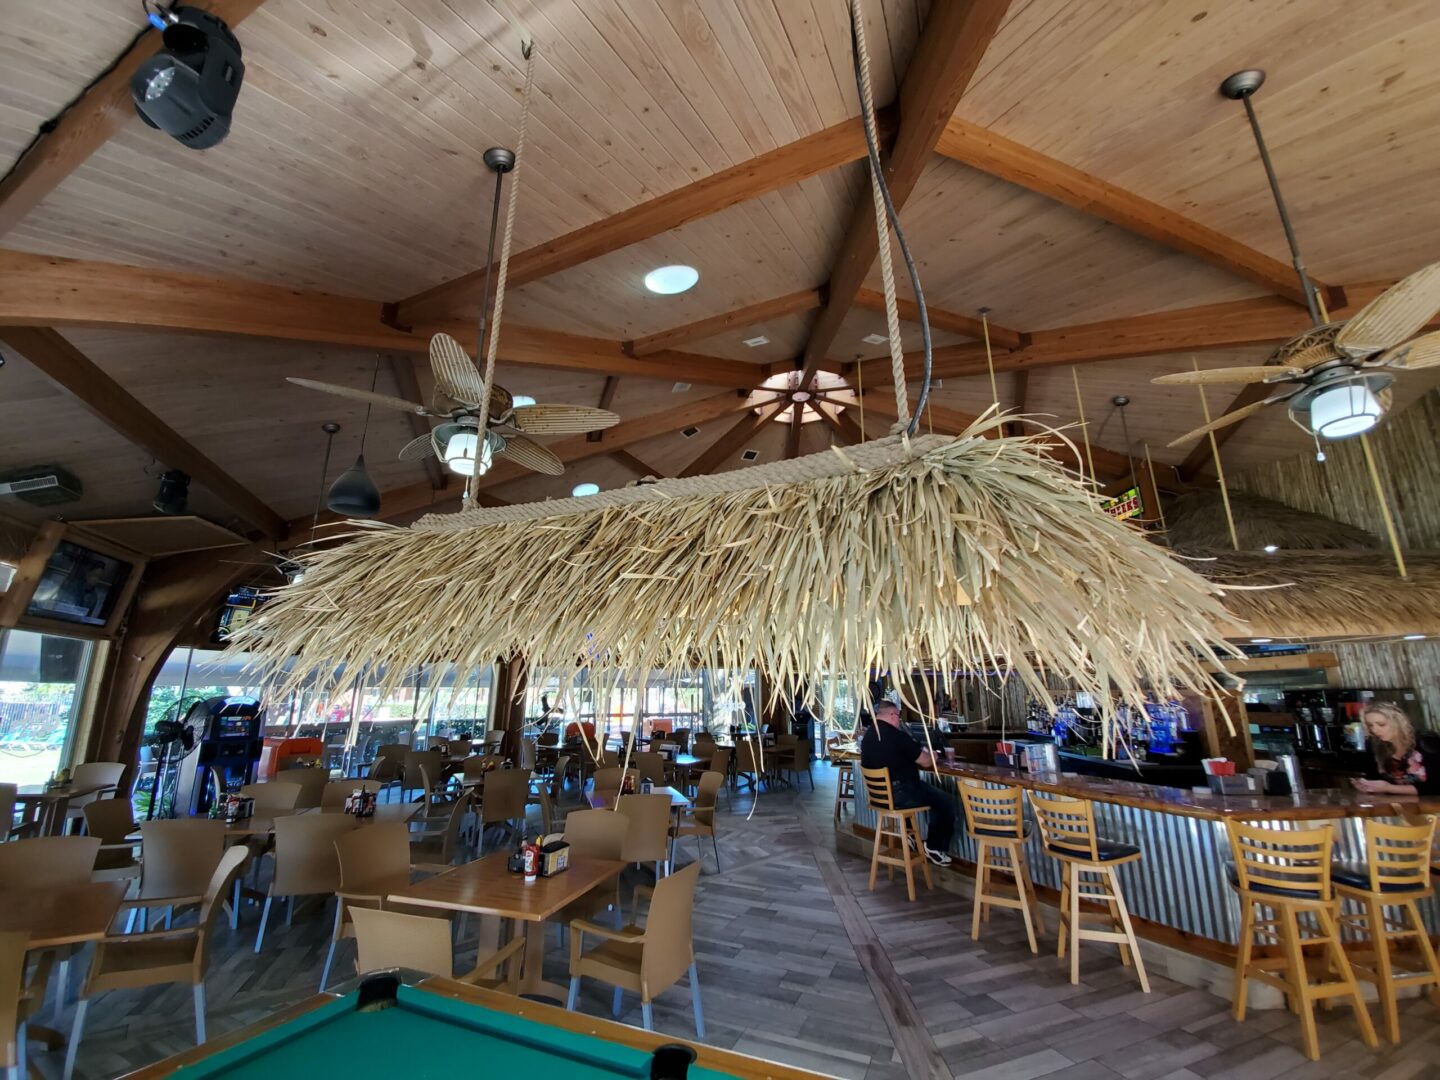 The ceiling of a restaurant with a tiki bar.